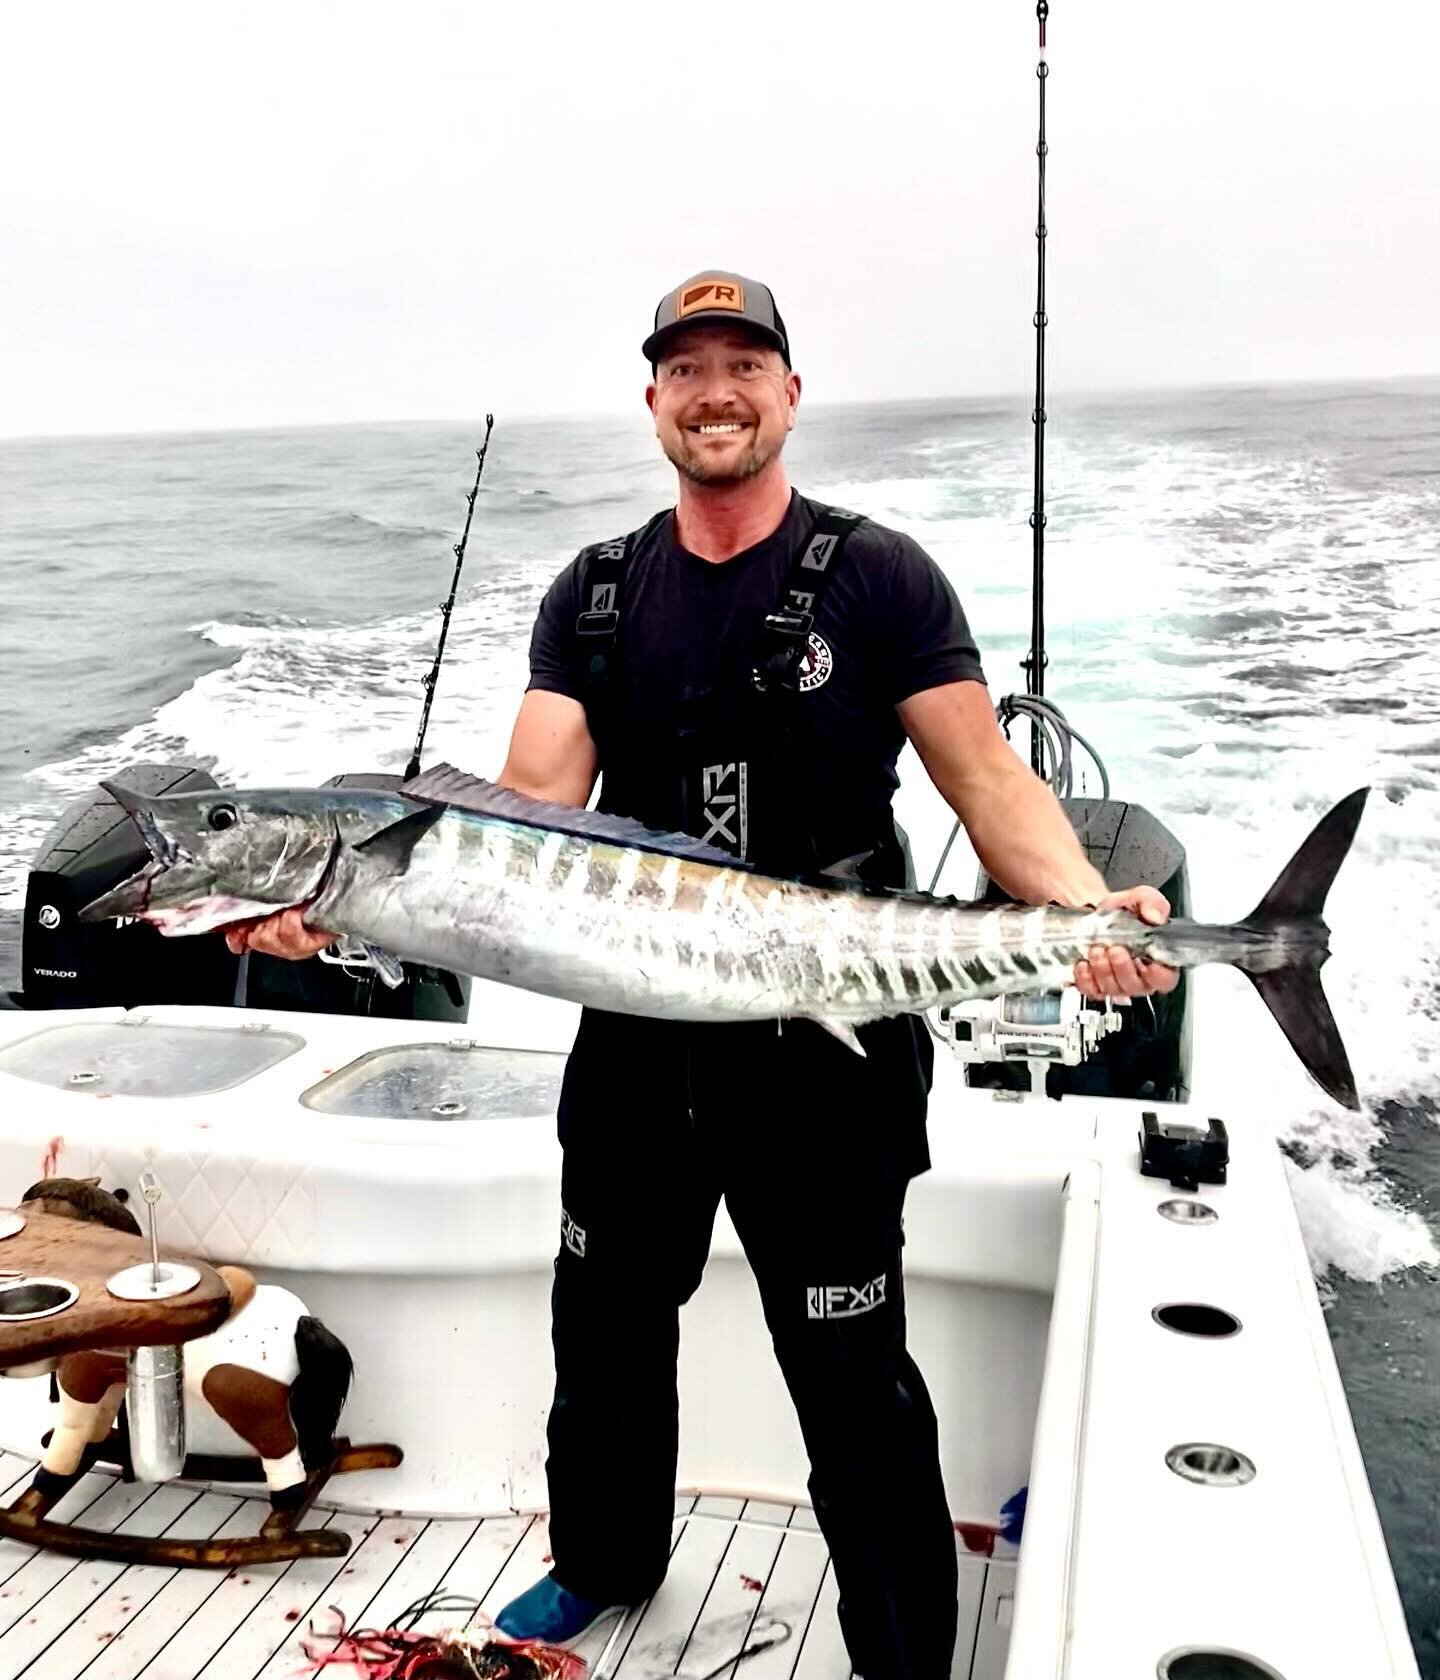 Wahoo on deck!!! The team set out this morning with a goal for @freespoolcc to catch a wahoo each month of the year, they got it done for March!!! ✅
🦓
🔥
🦓 
@SaltFeverGuideService&mdash;&gt; 910.250.3021
.
.
LIKE OUR PAGE TO FOLLOW THE SQUAD
🇺🇸🐟